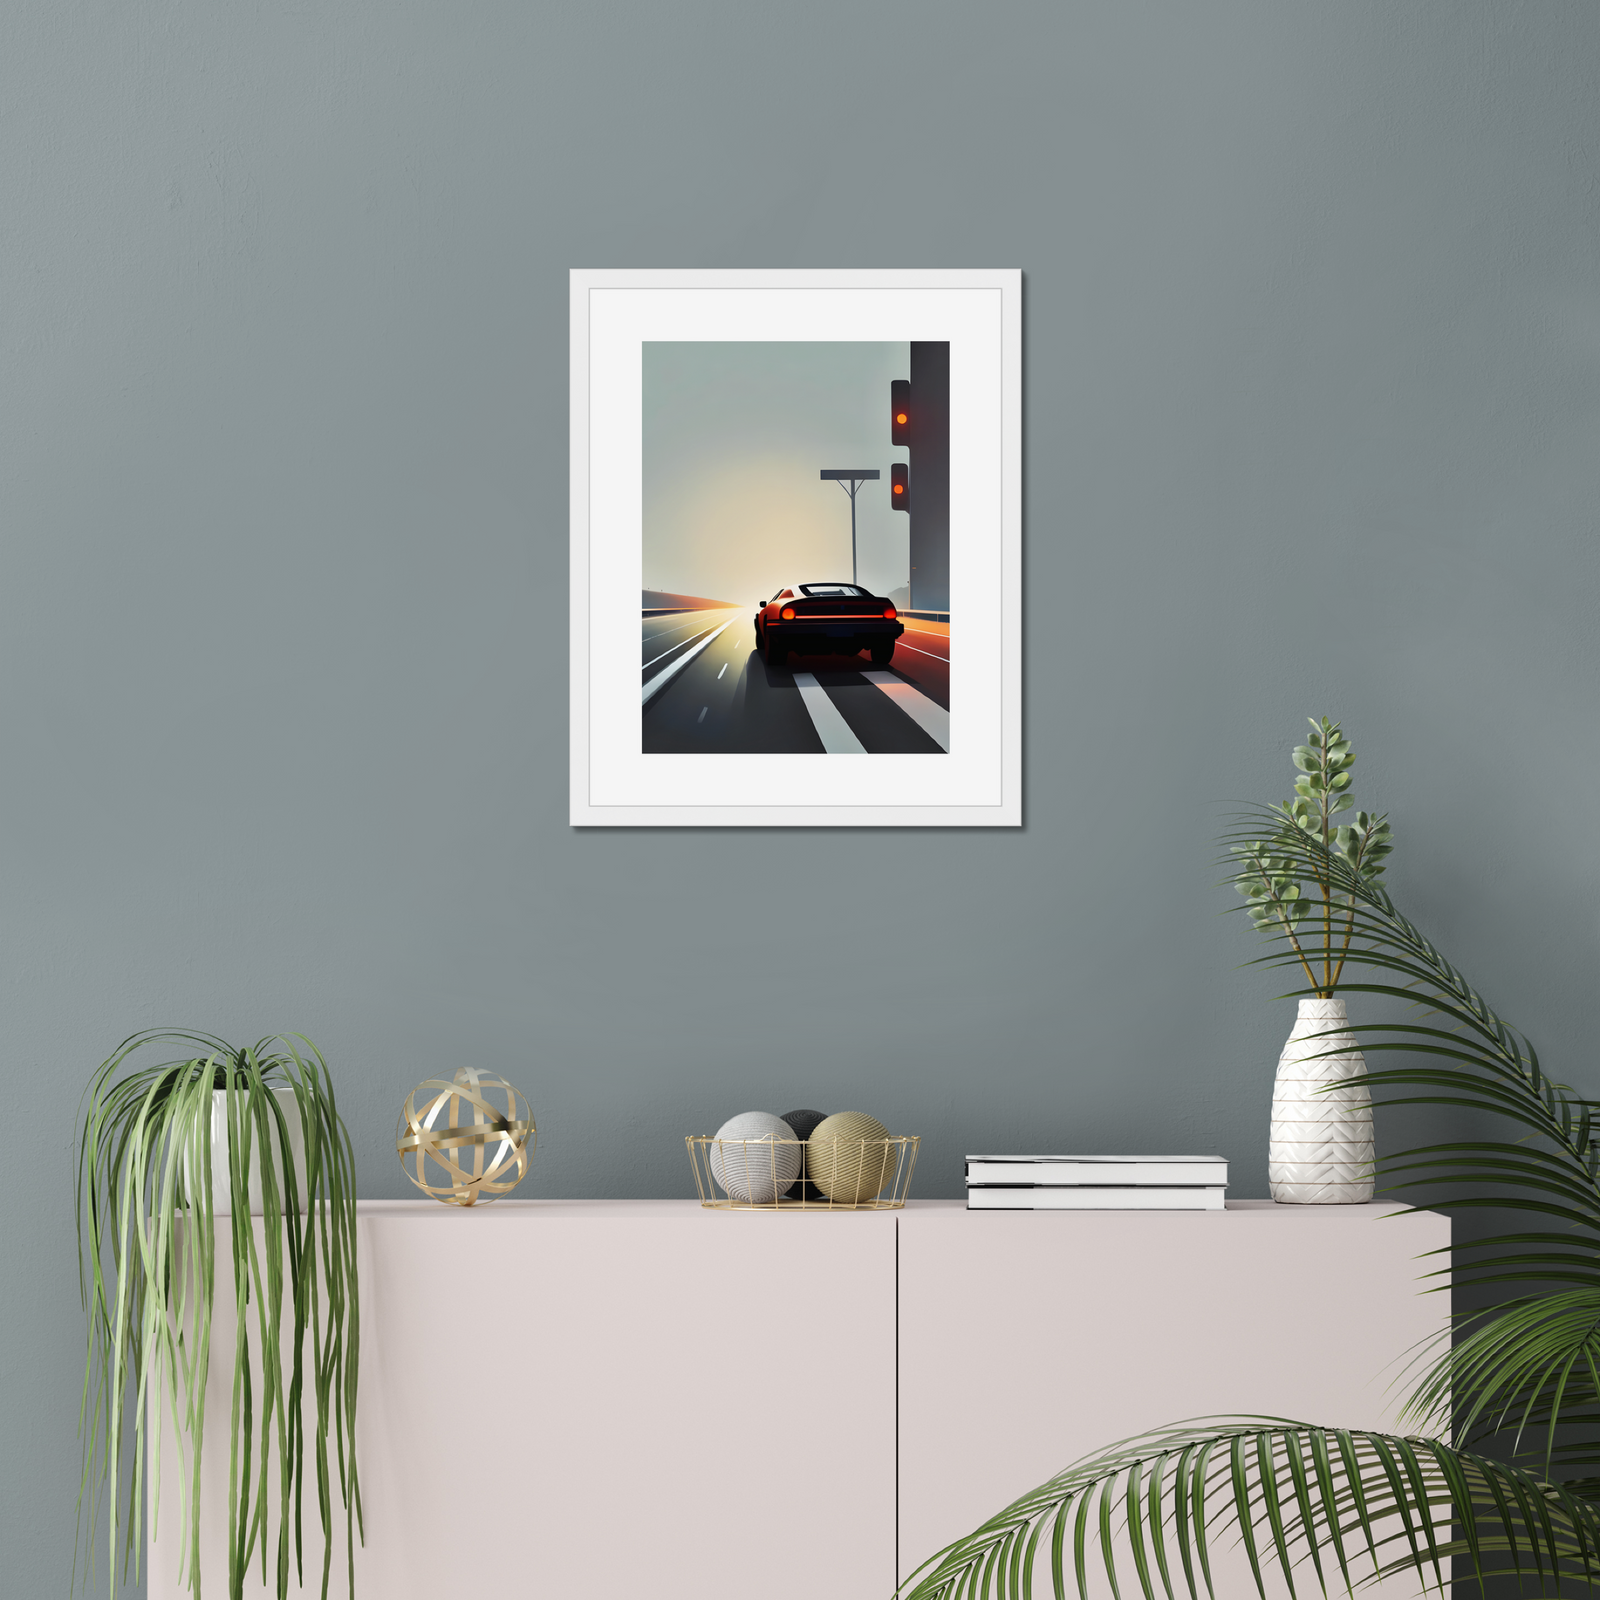 Framed Posters by printlagoon Blog to elevate your home's walls